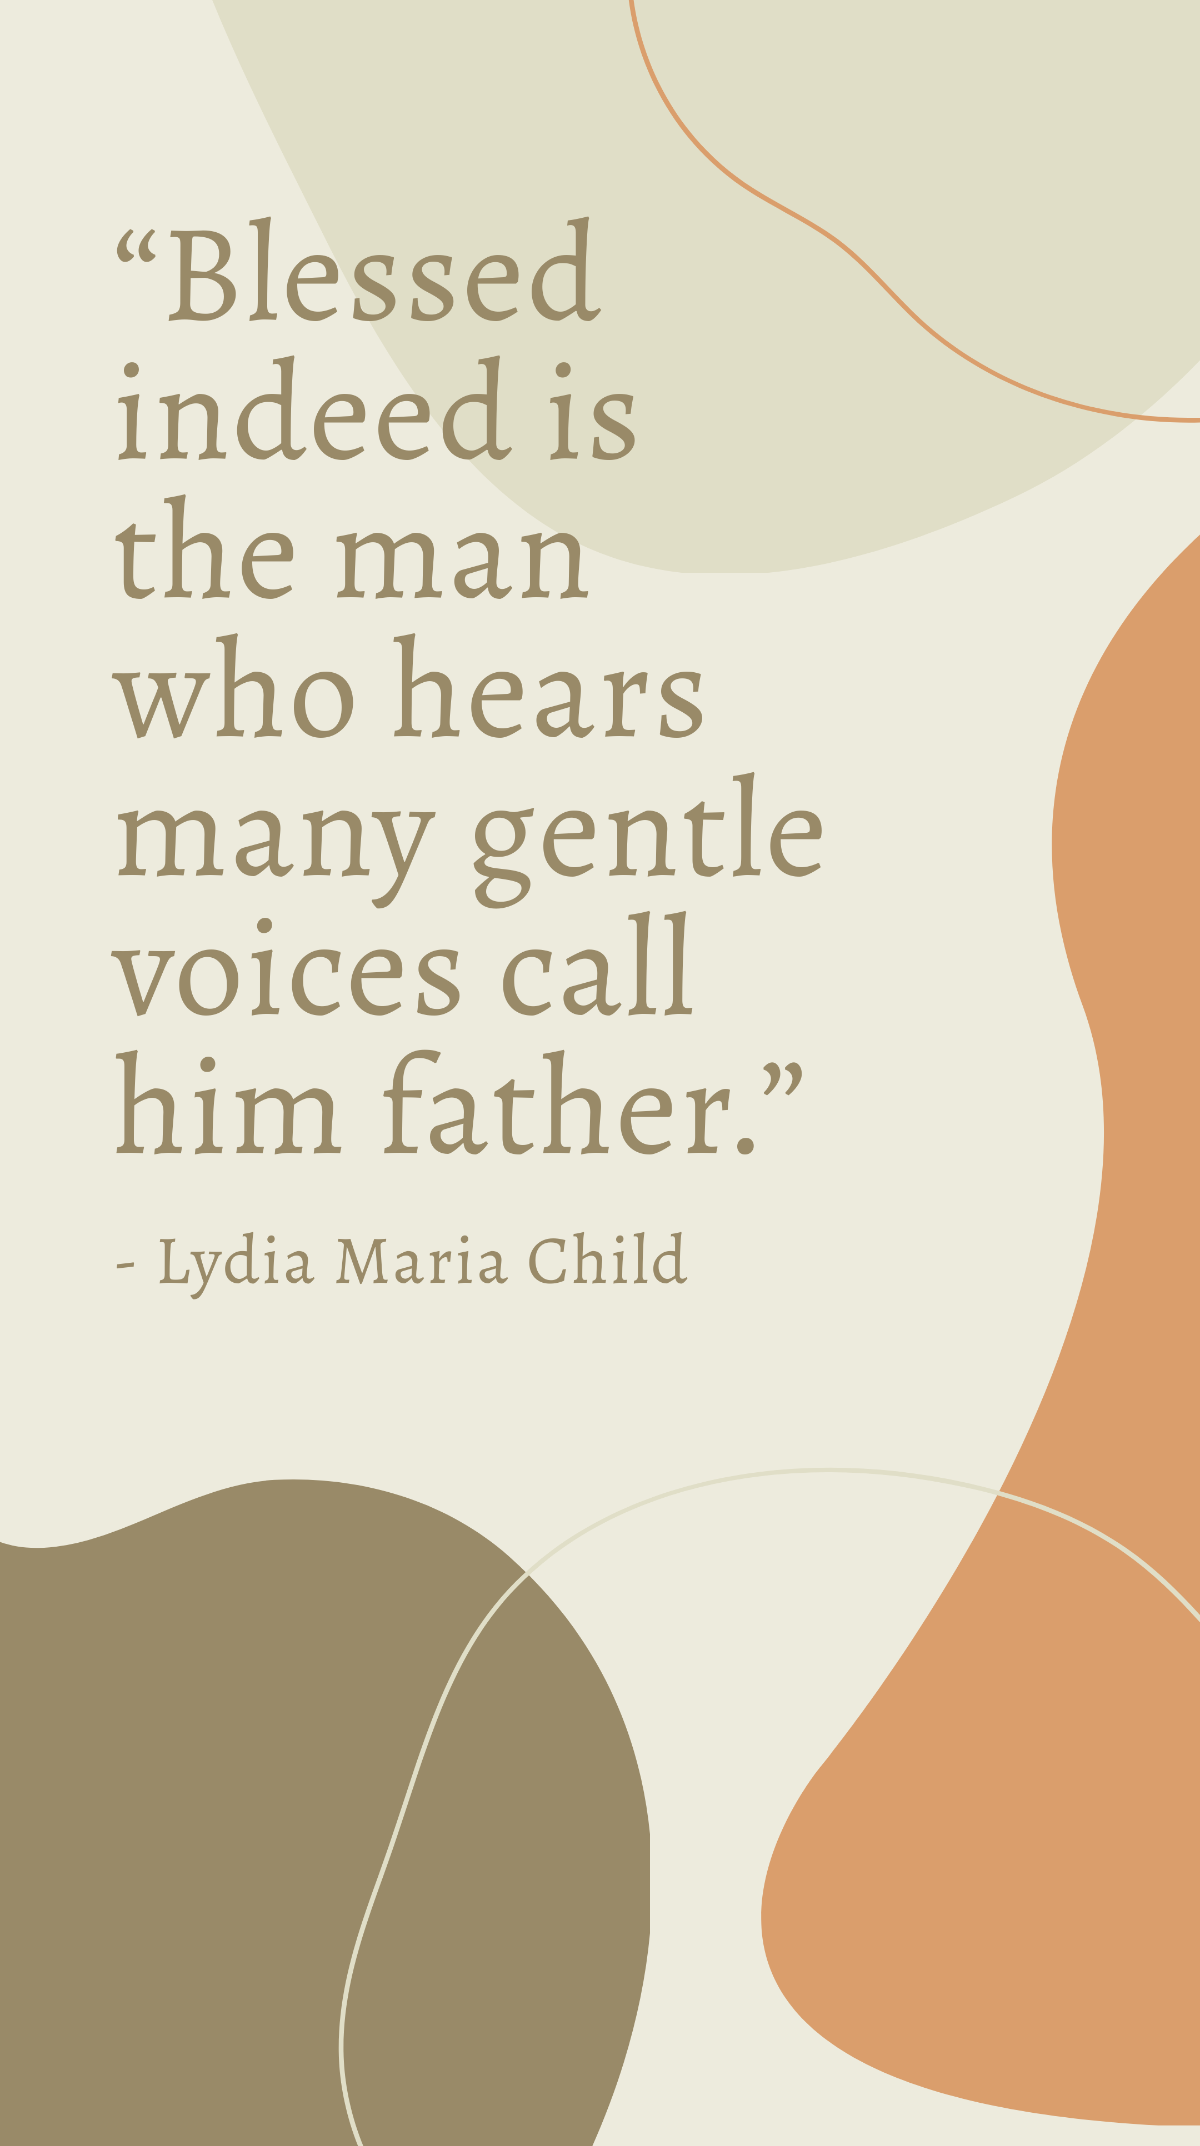 Lydia Maria Child - “Blessed indeed is the man who hears many gentle voices call him father.” Template